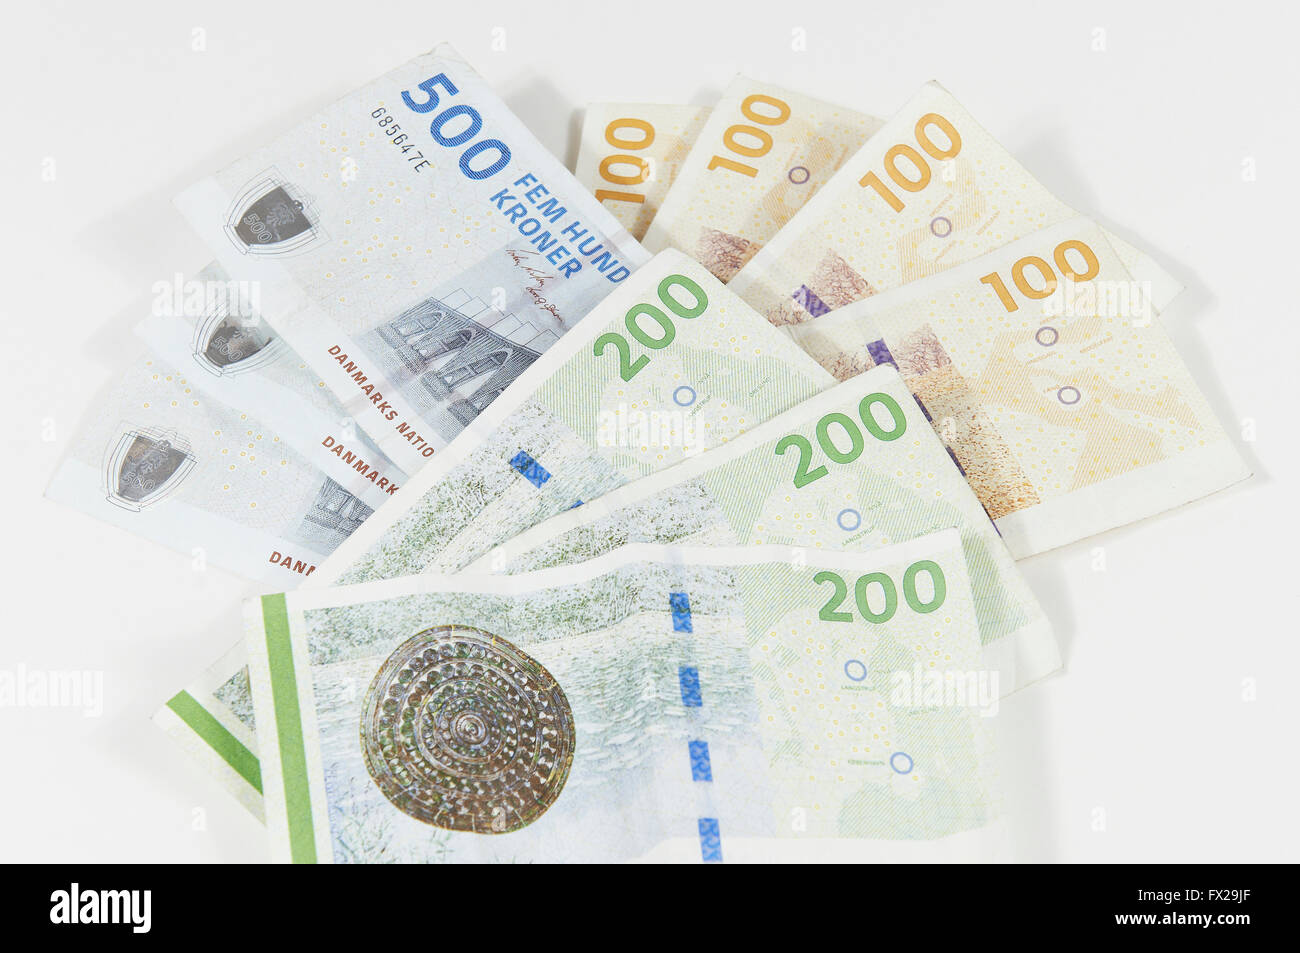 Danish Bank High Resolution Stock Photography and Images - Alamy